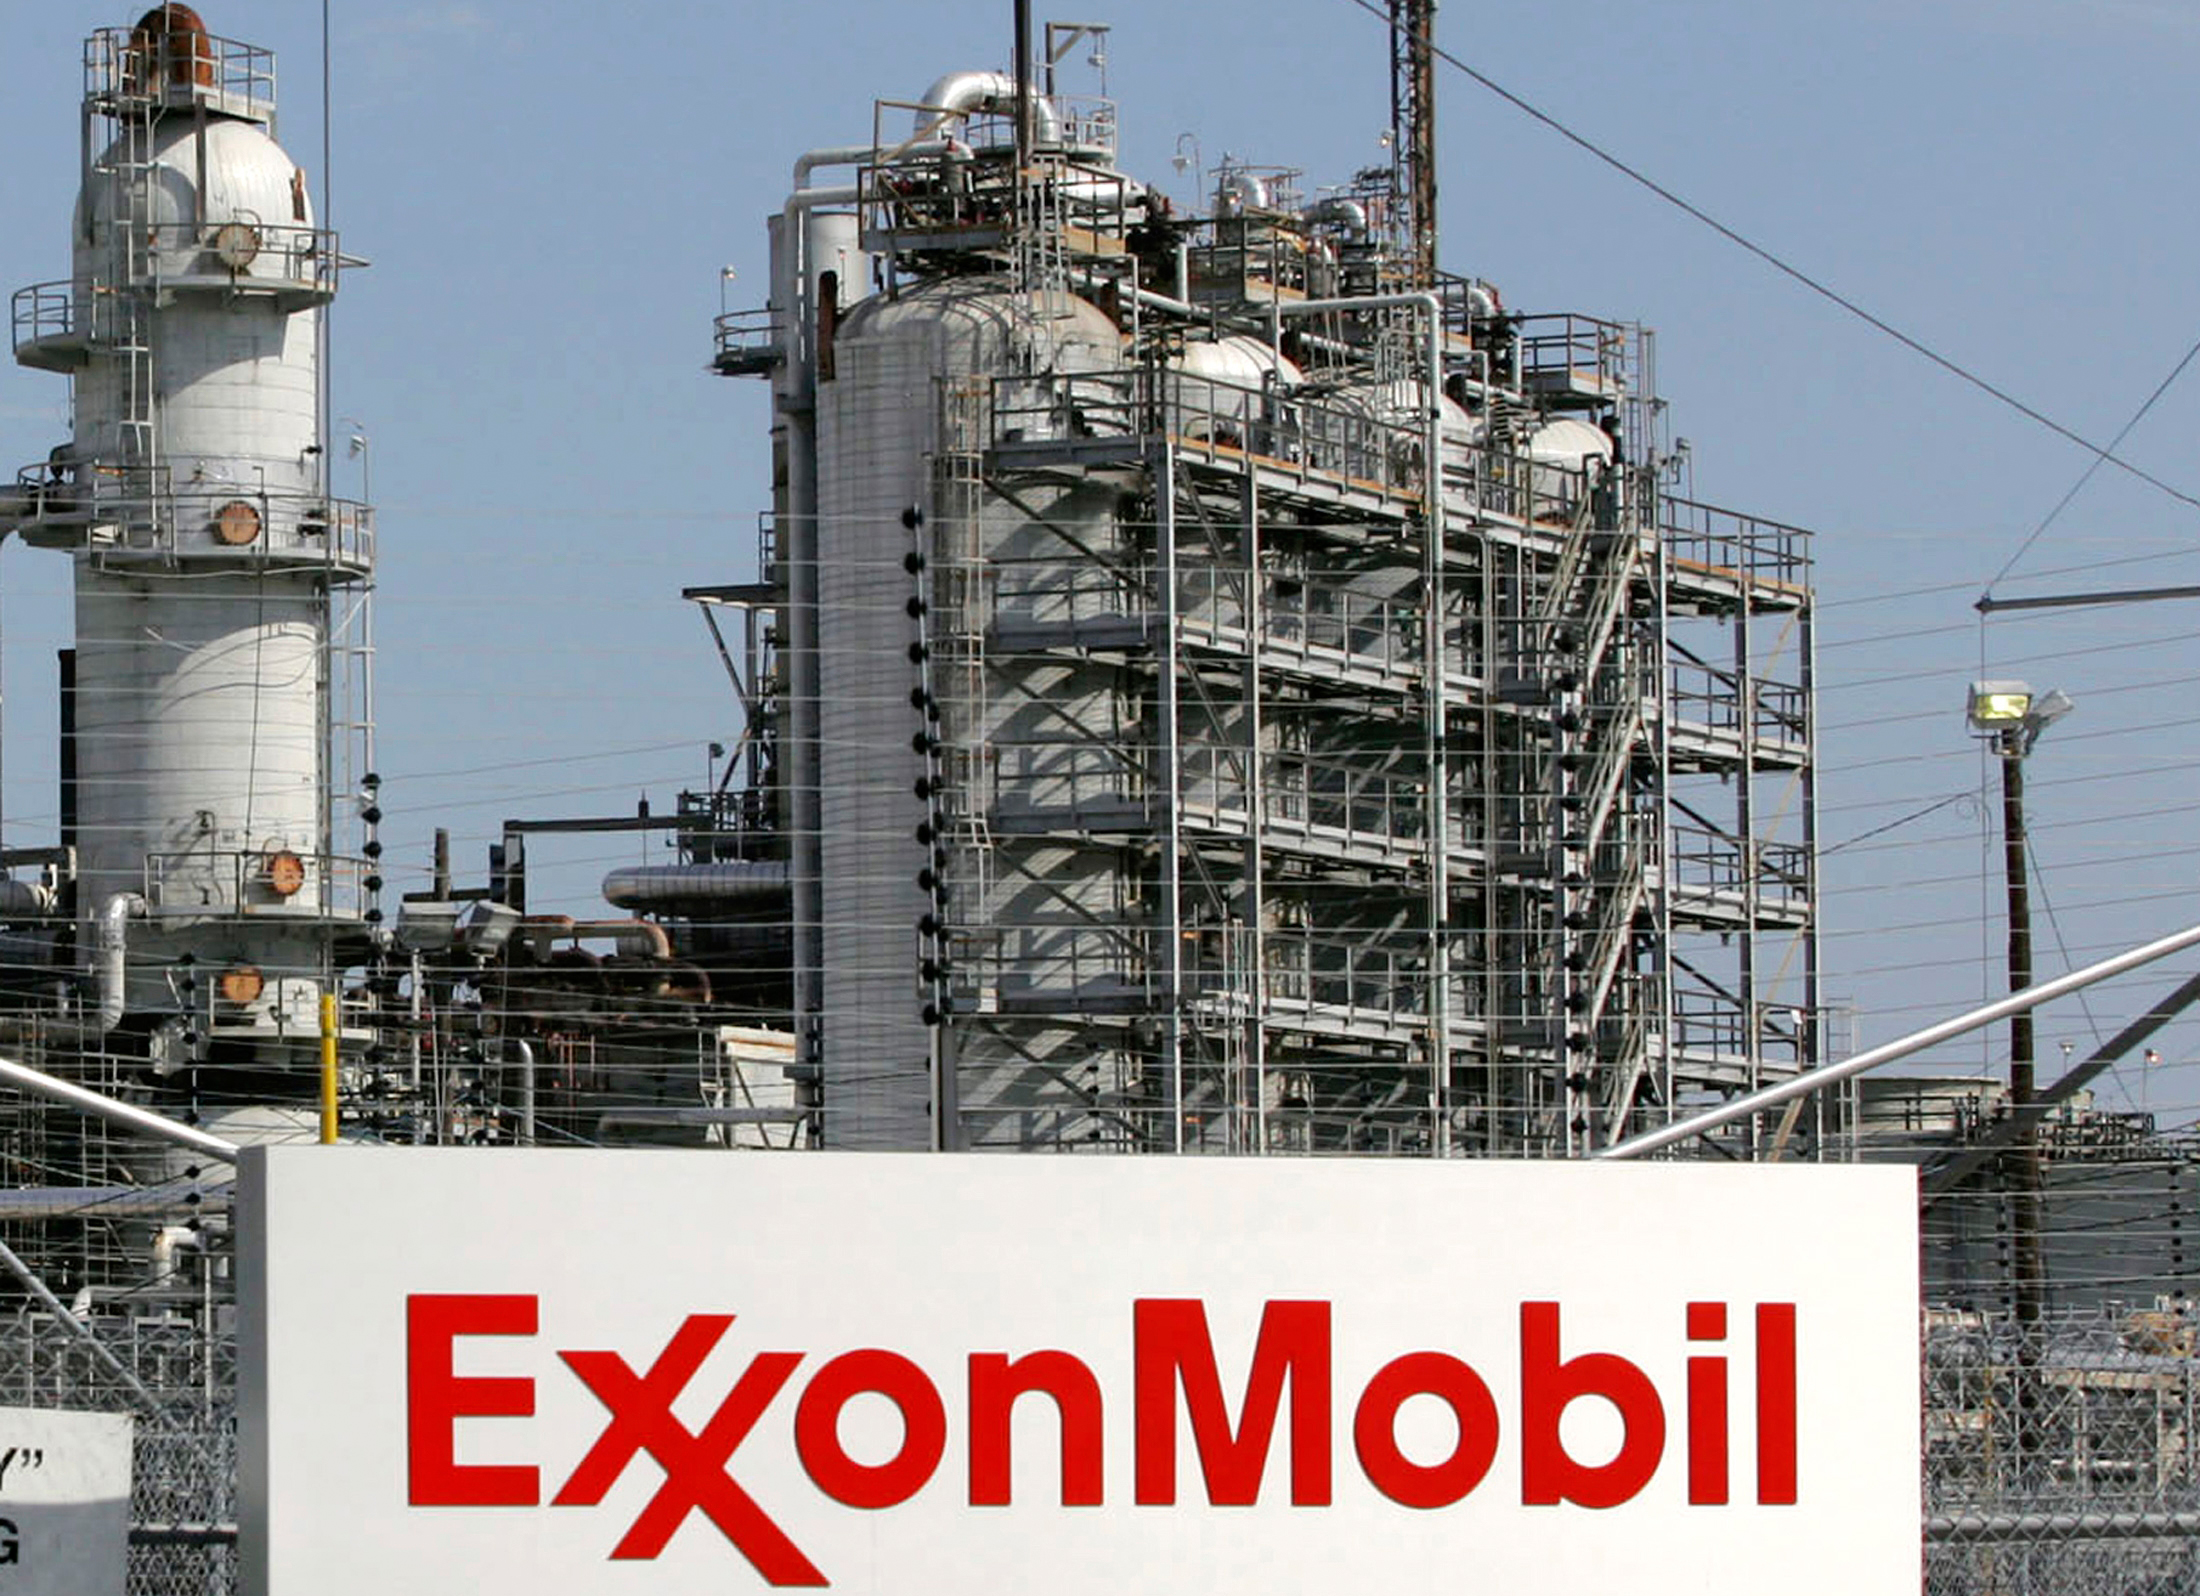 A view of the Exxon Mobil refinery in Baytown, Texas September 15, 2008. A big chunk of U.S. energy production shuttered by Hurricane Ike could recover quickly amid early indications the storm caused only minor to moderate damage to platforms and coastal refineries. REUTERS/Jessica Rinaldi  ( UNITED STATES)